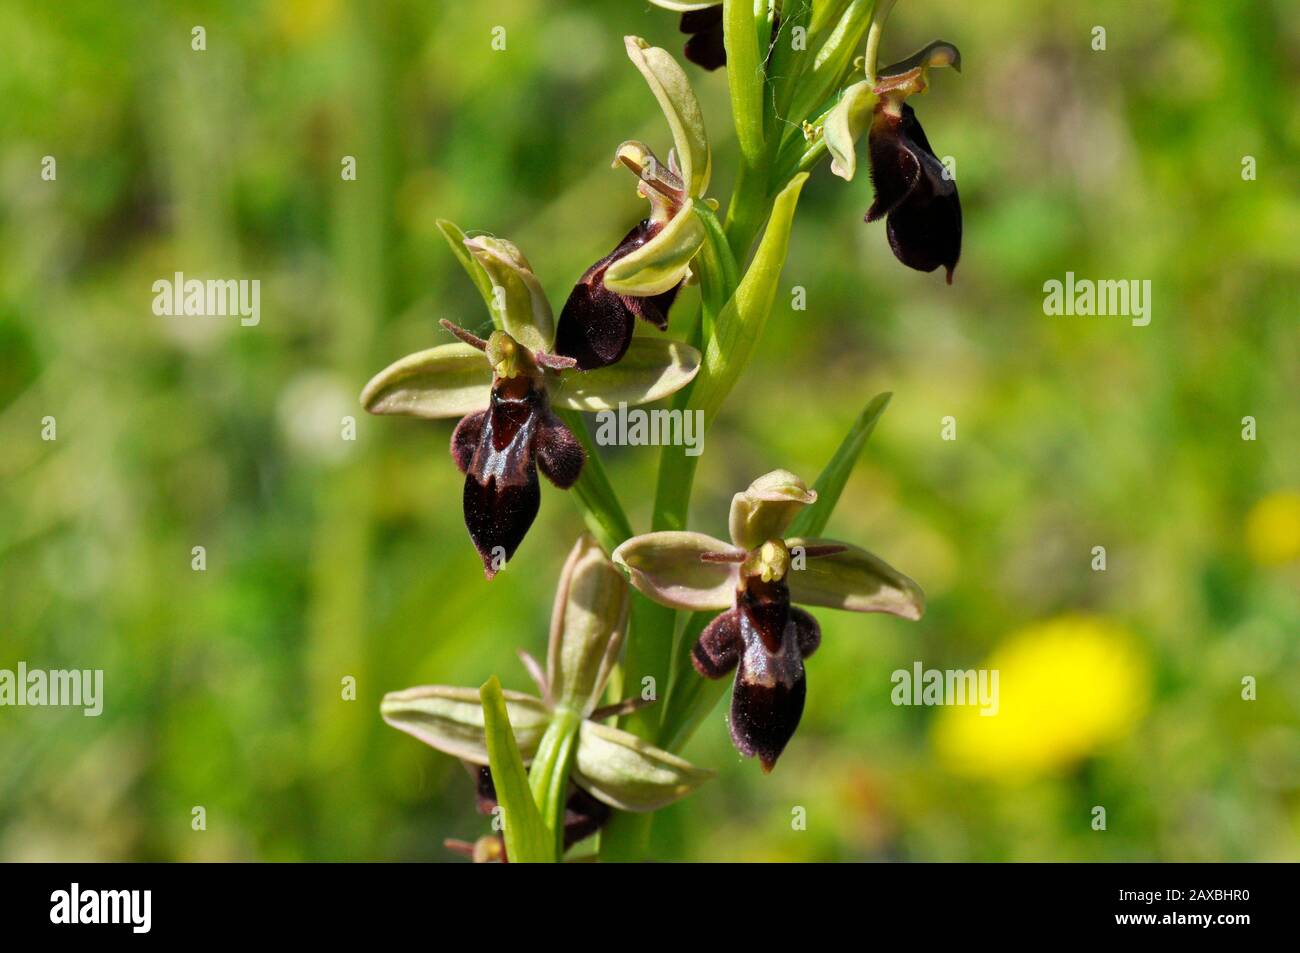 Bee Fly Hybrid Orchid, Small bear like appearance,calcium rich soil, Flowers June, Stock Photo